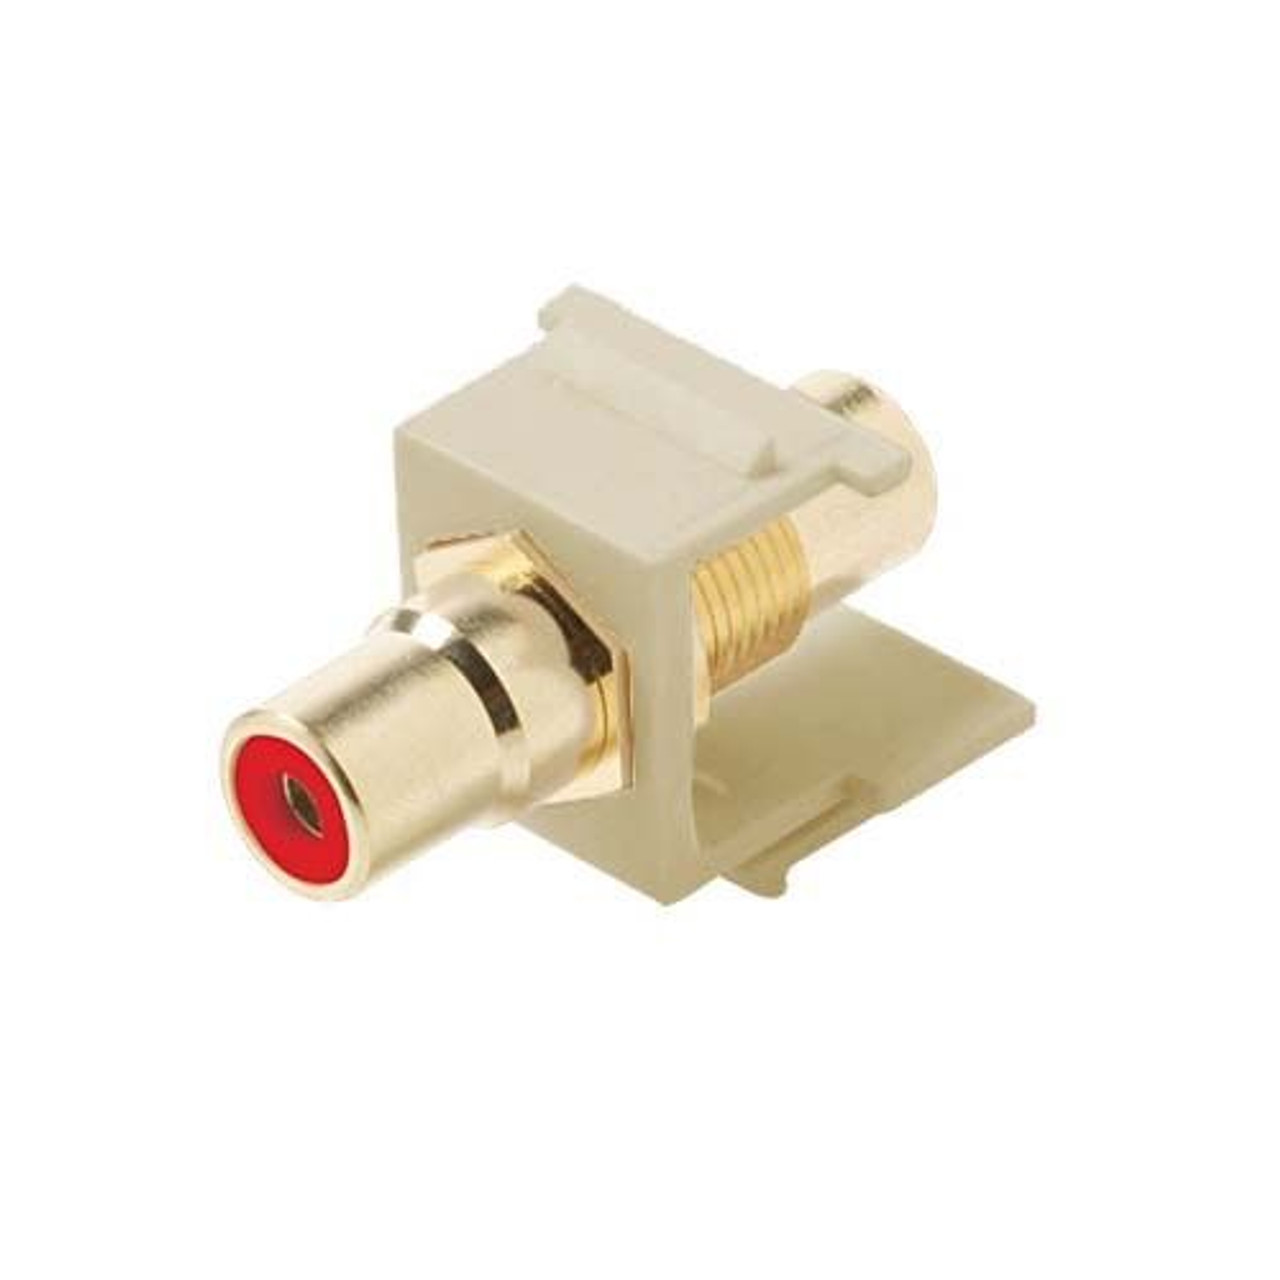 Steren 310-461IV-10 RCA Keystone Insert Connector Jack 10 Pack RED Band Ivory QuickPort Audio Video Snap-In, Wall Plate Snap-In Data Junction Component Connection, Part # 310461IV-10